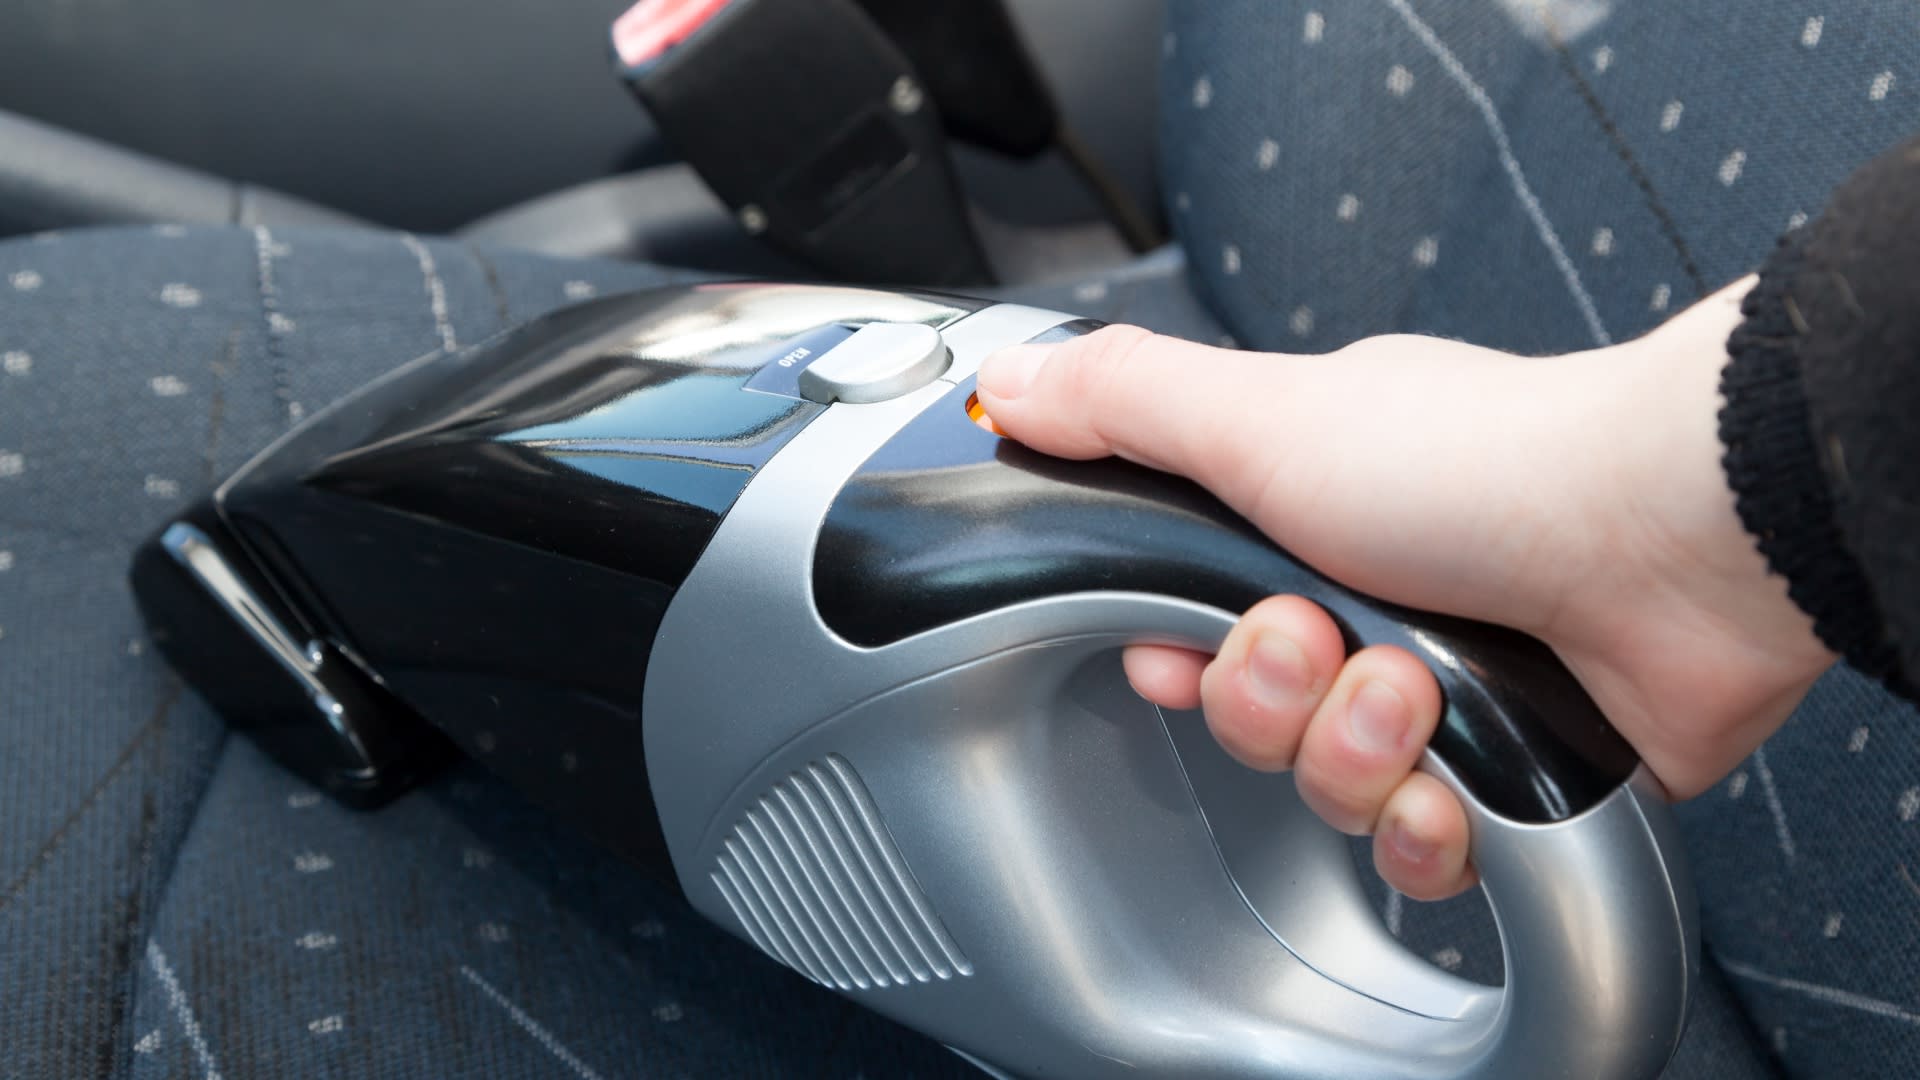 The Best Handheld Vacuums to Get Your Vehicle NewCar Clean